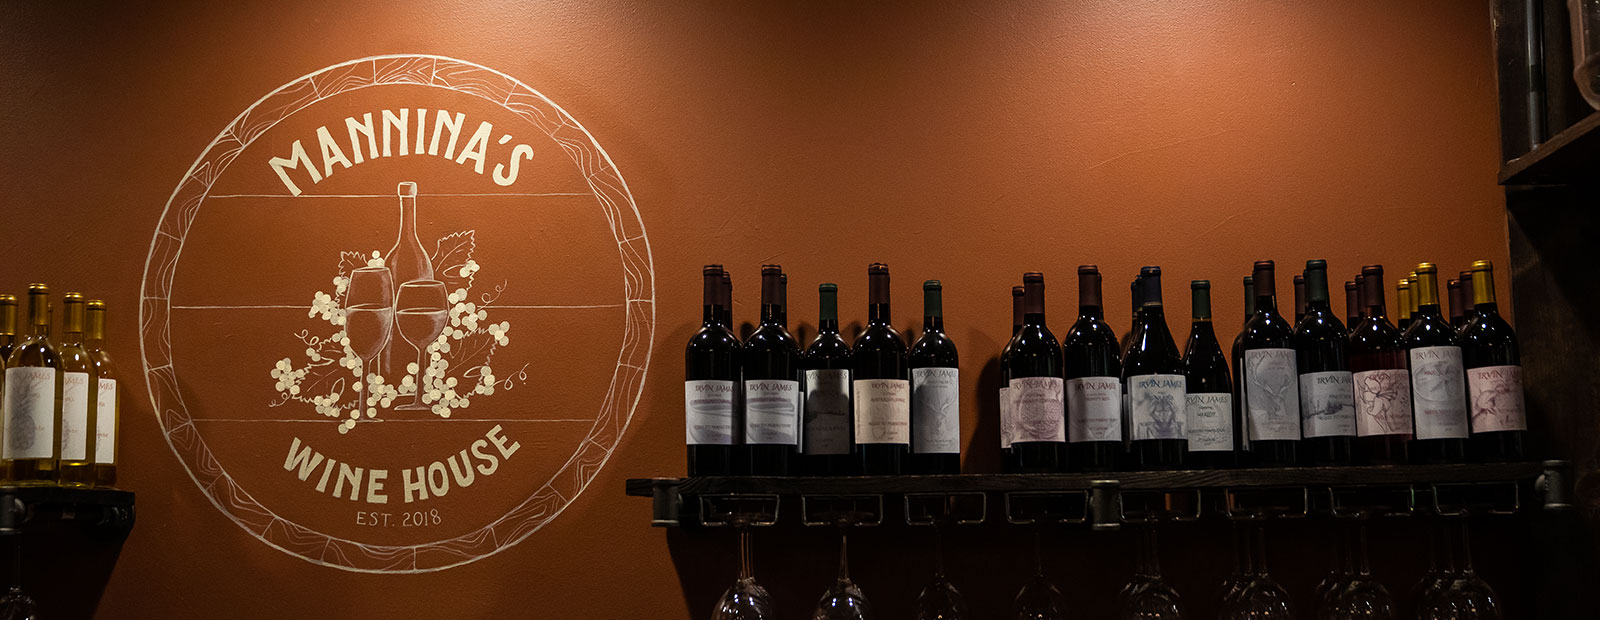 Wine lovers will appreciate what Mannina's Wine House has to offer.